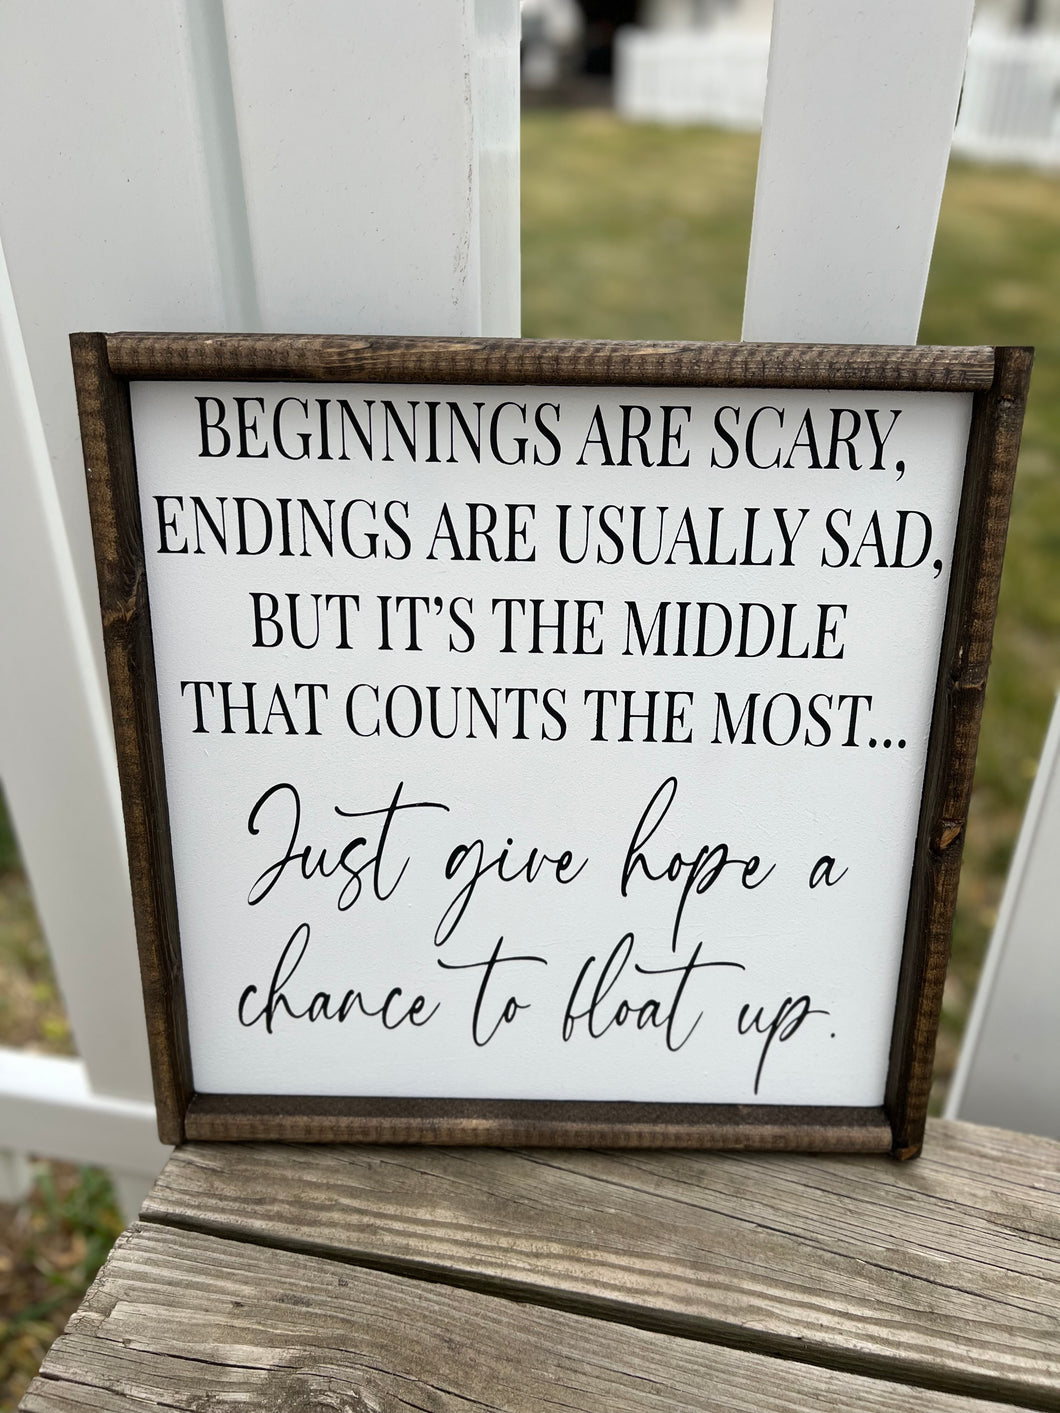 Beginnings are scary, endings are usually sad. But it’s the middle that counts the most…Just give hope a chance to float up.